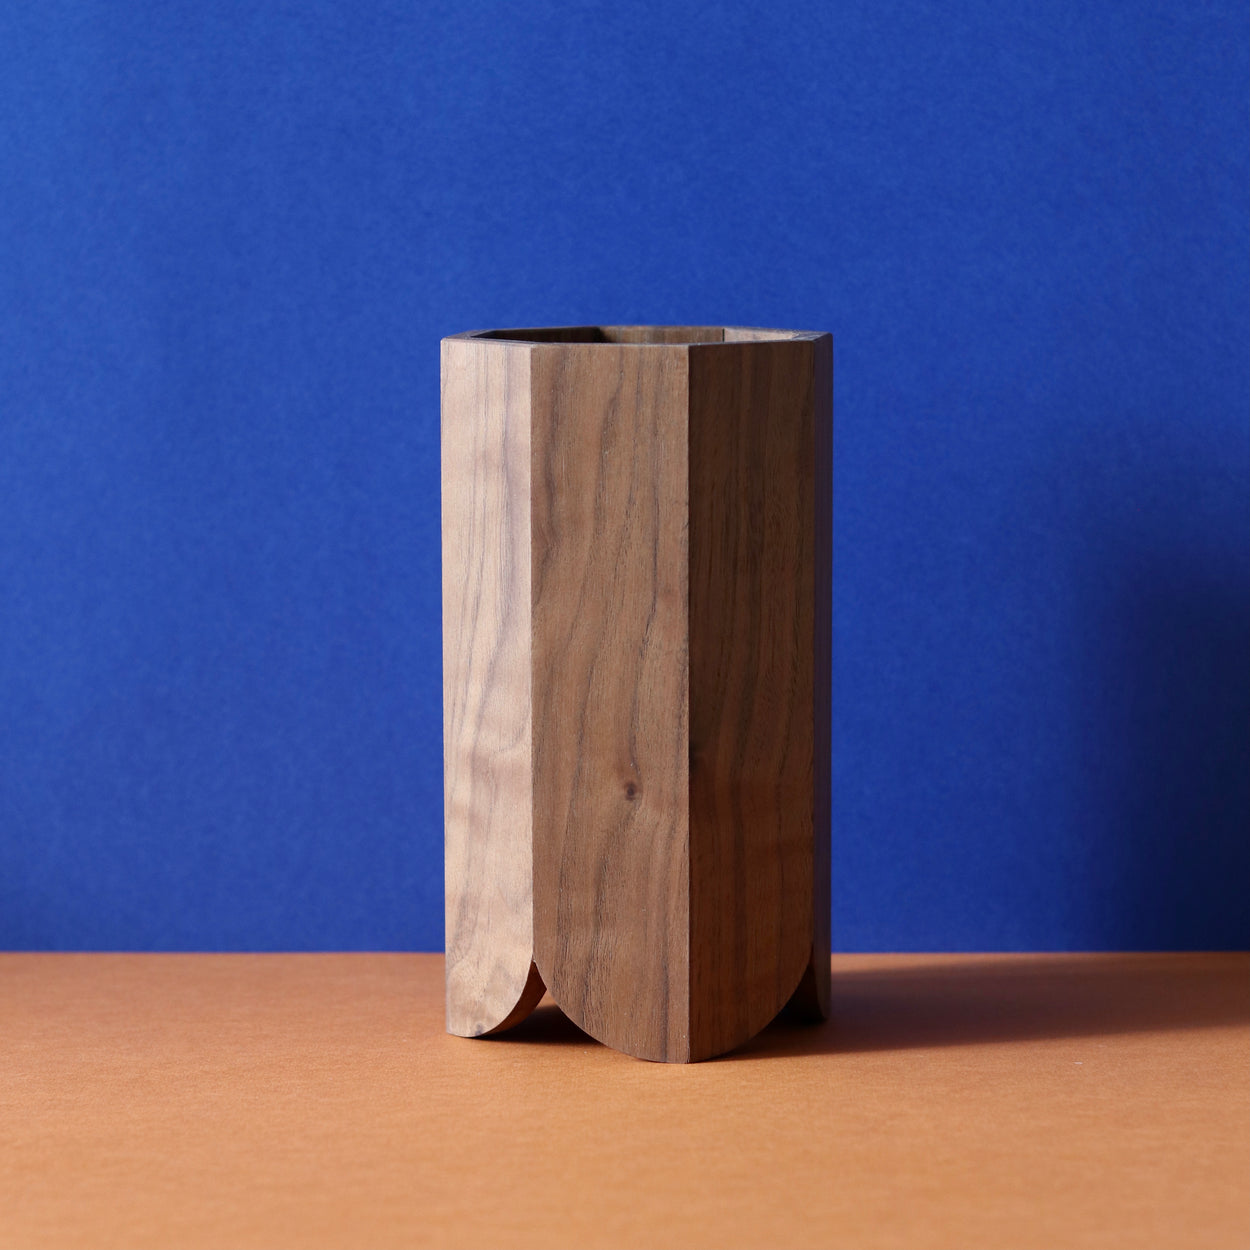 Handmade Wood Kitchen Utensil Holder in walnut against a blue and brown background.